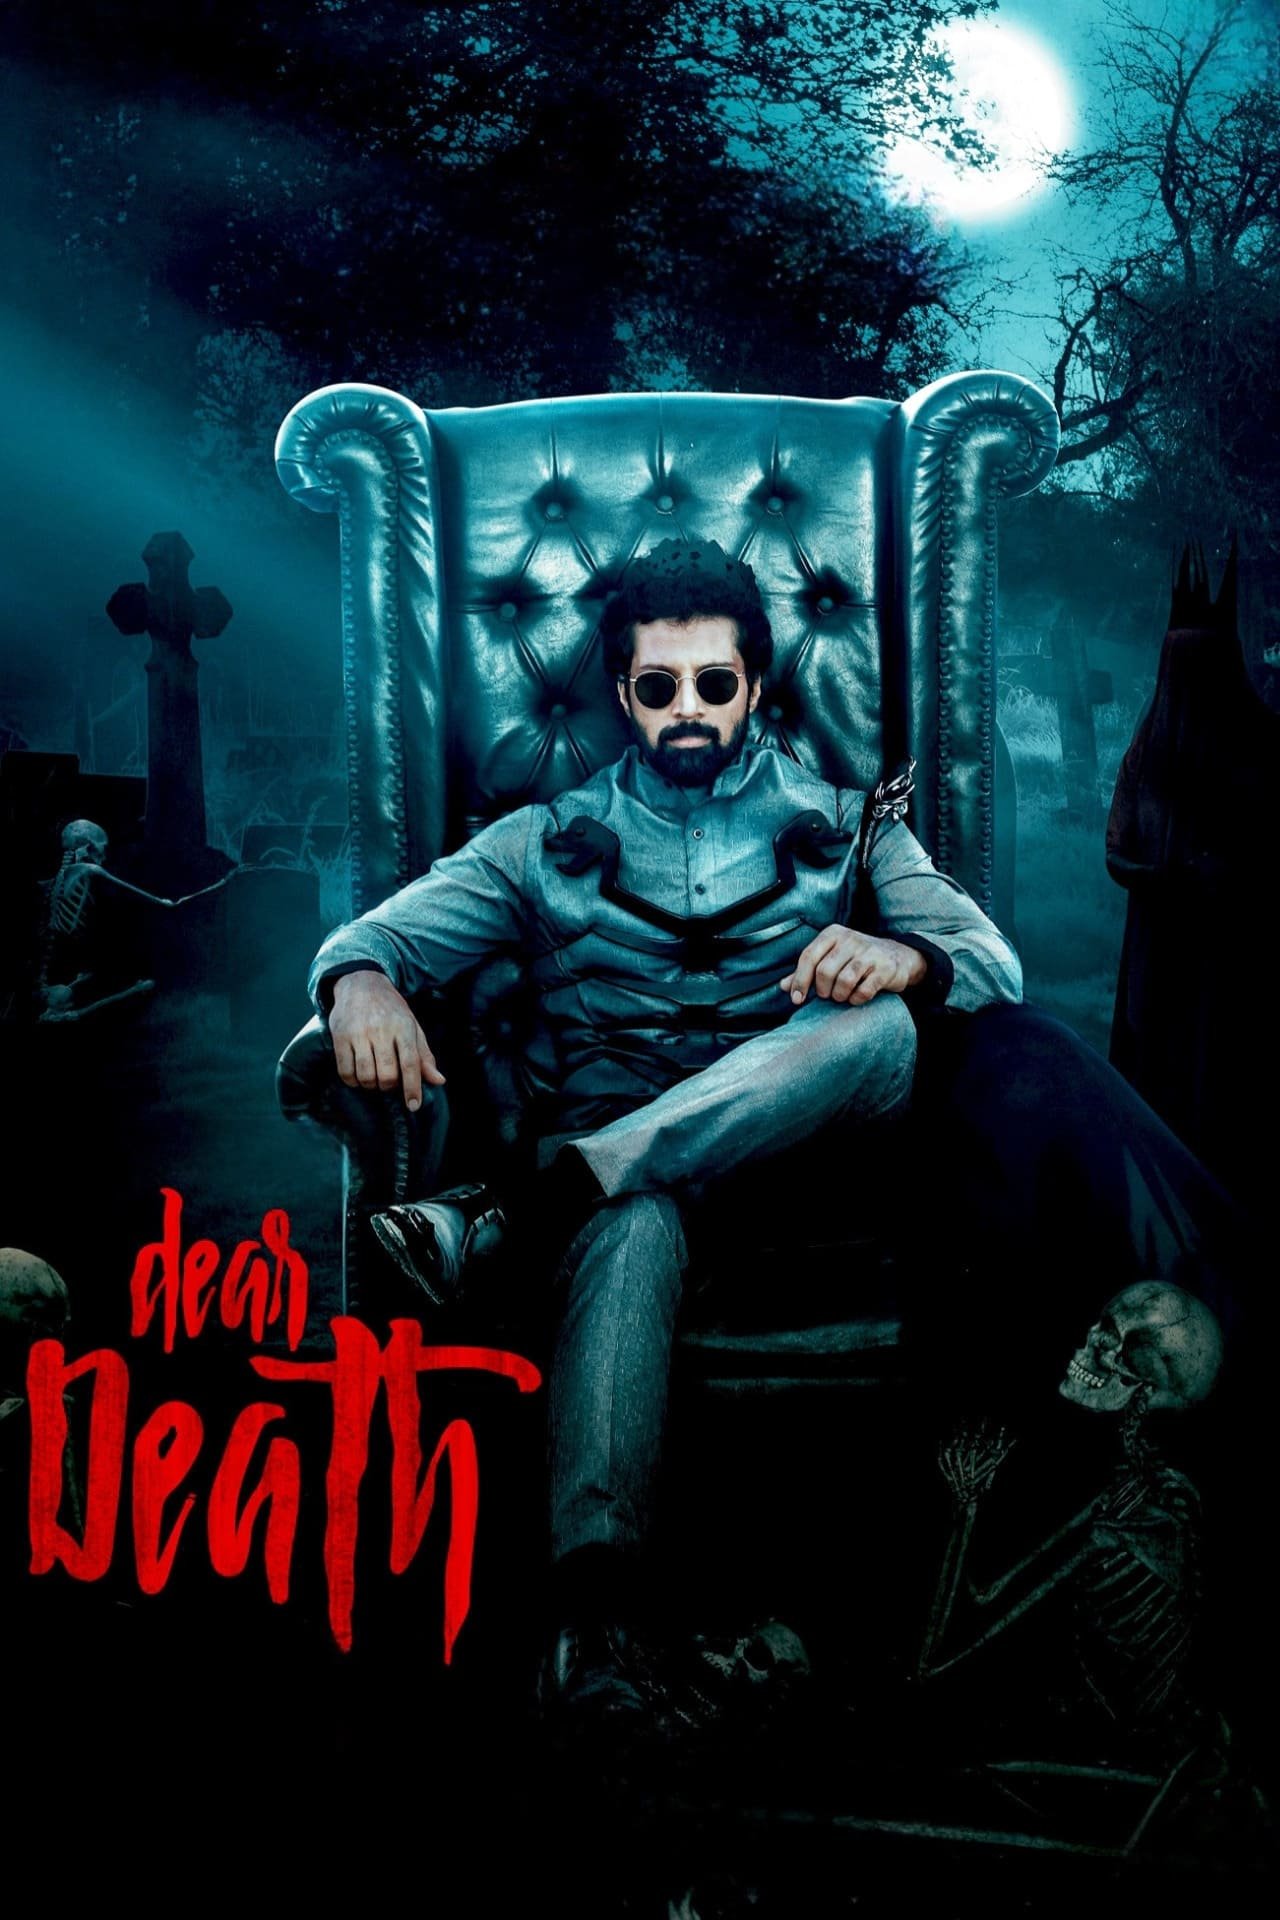 Poster for the movie "Dear Death"